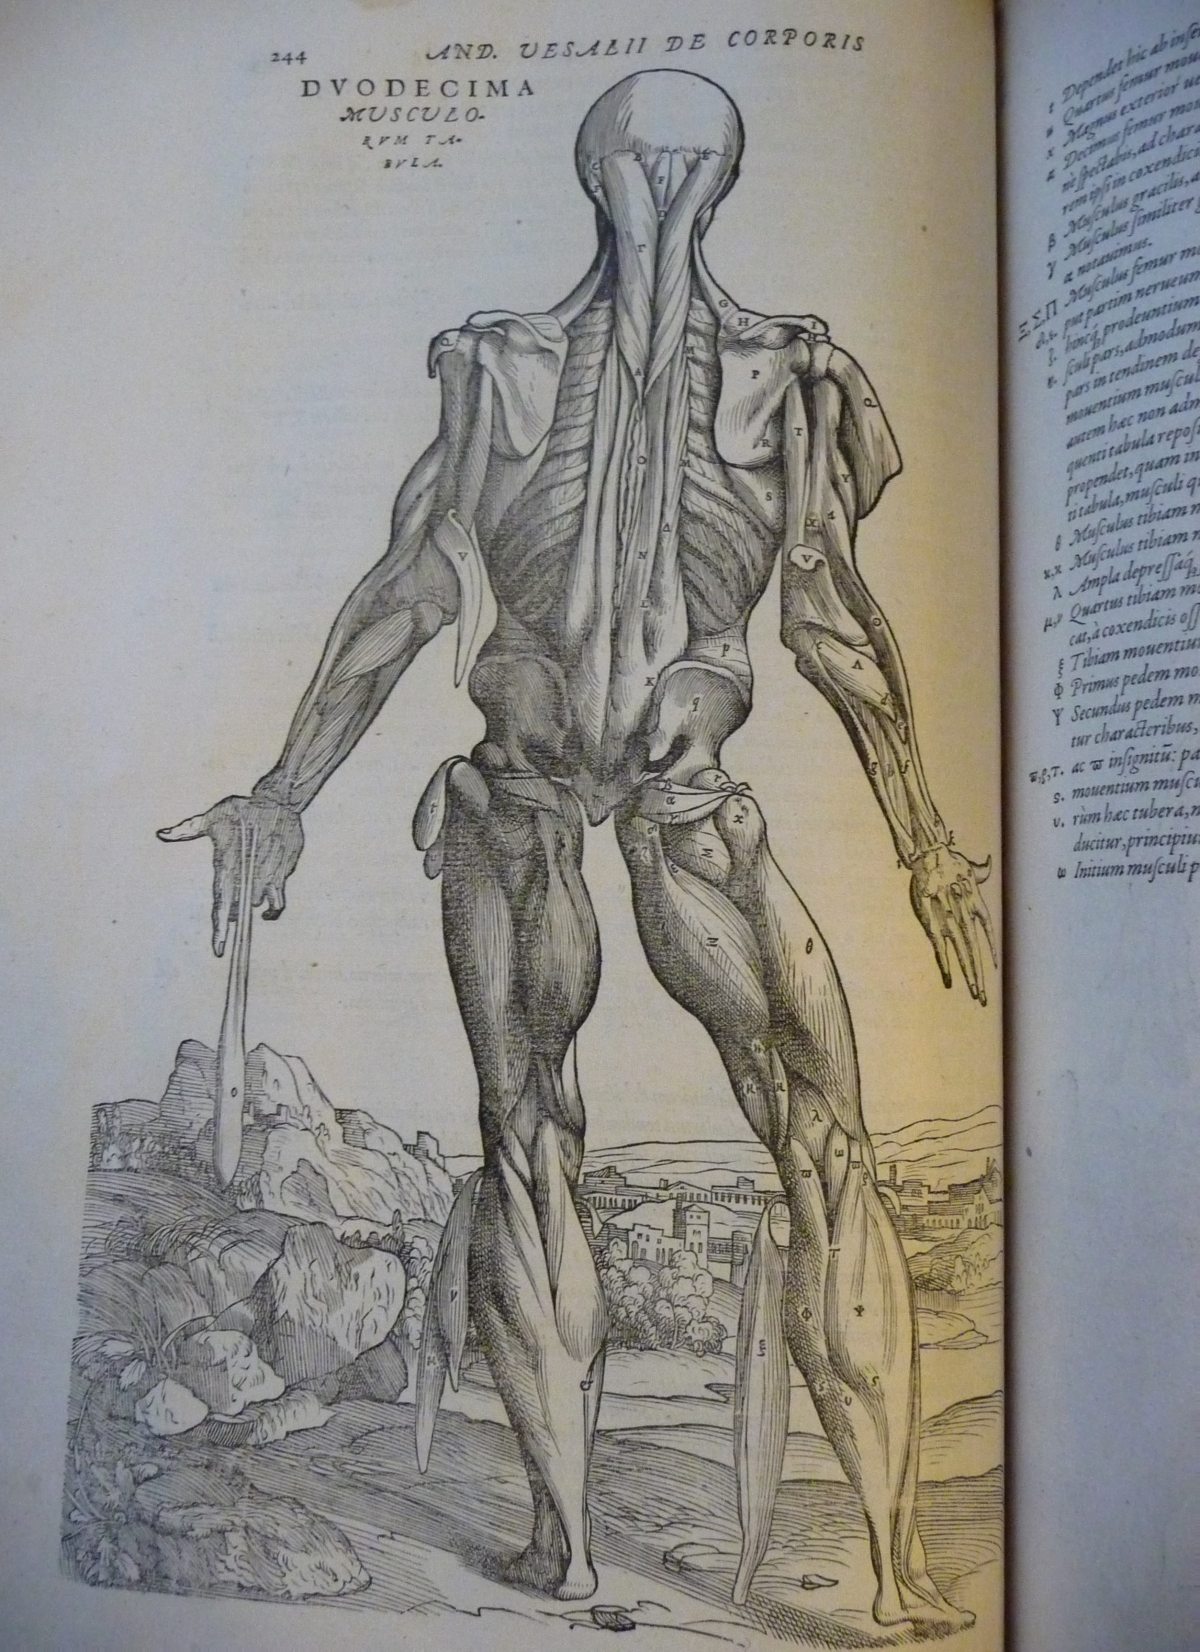 An intricately detailed drawing of human dissection in an allegorical pose, from 'De humani corporis fabrica' (The fabric of the human body) by Andreas Vesalius.